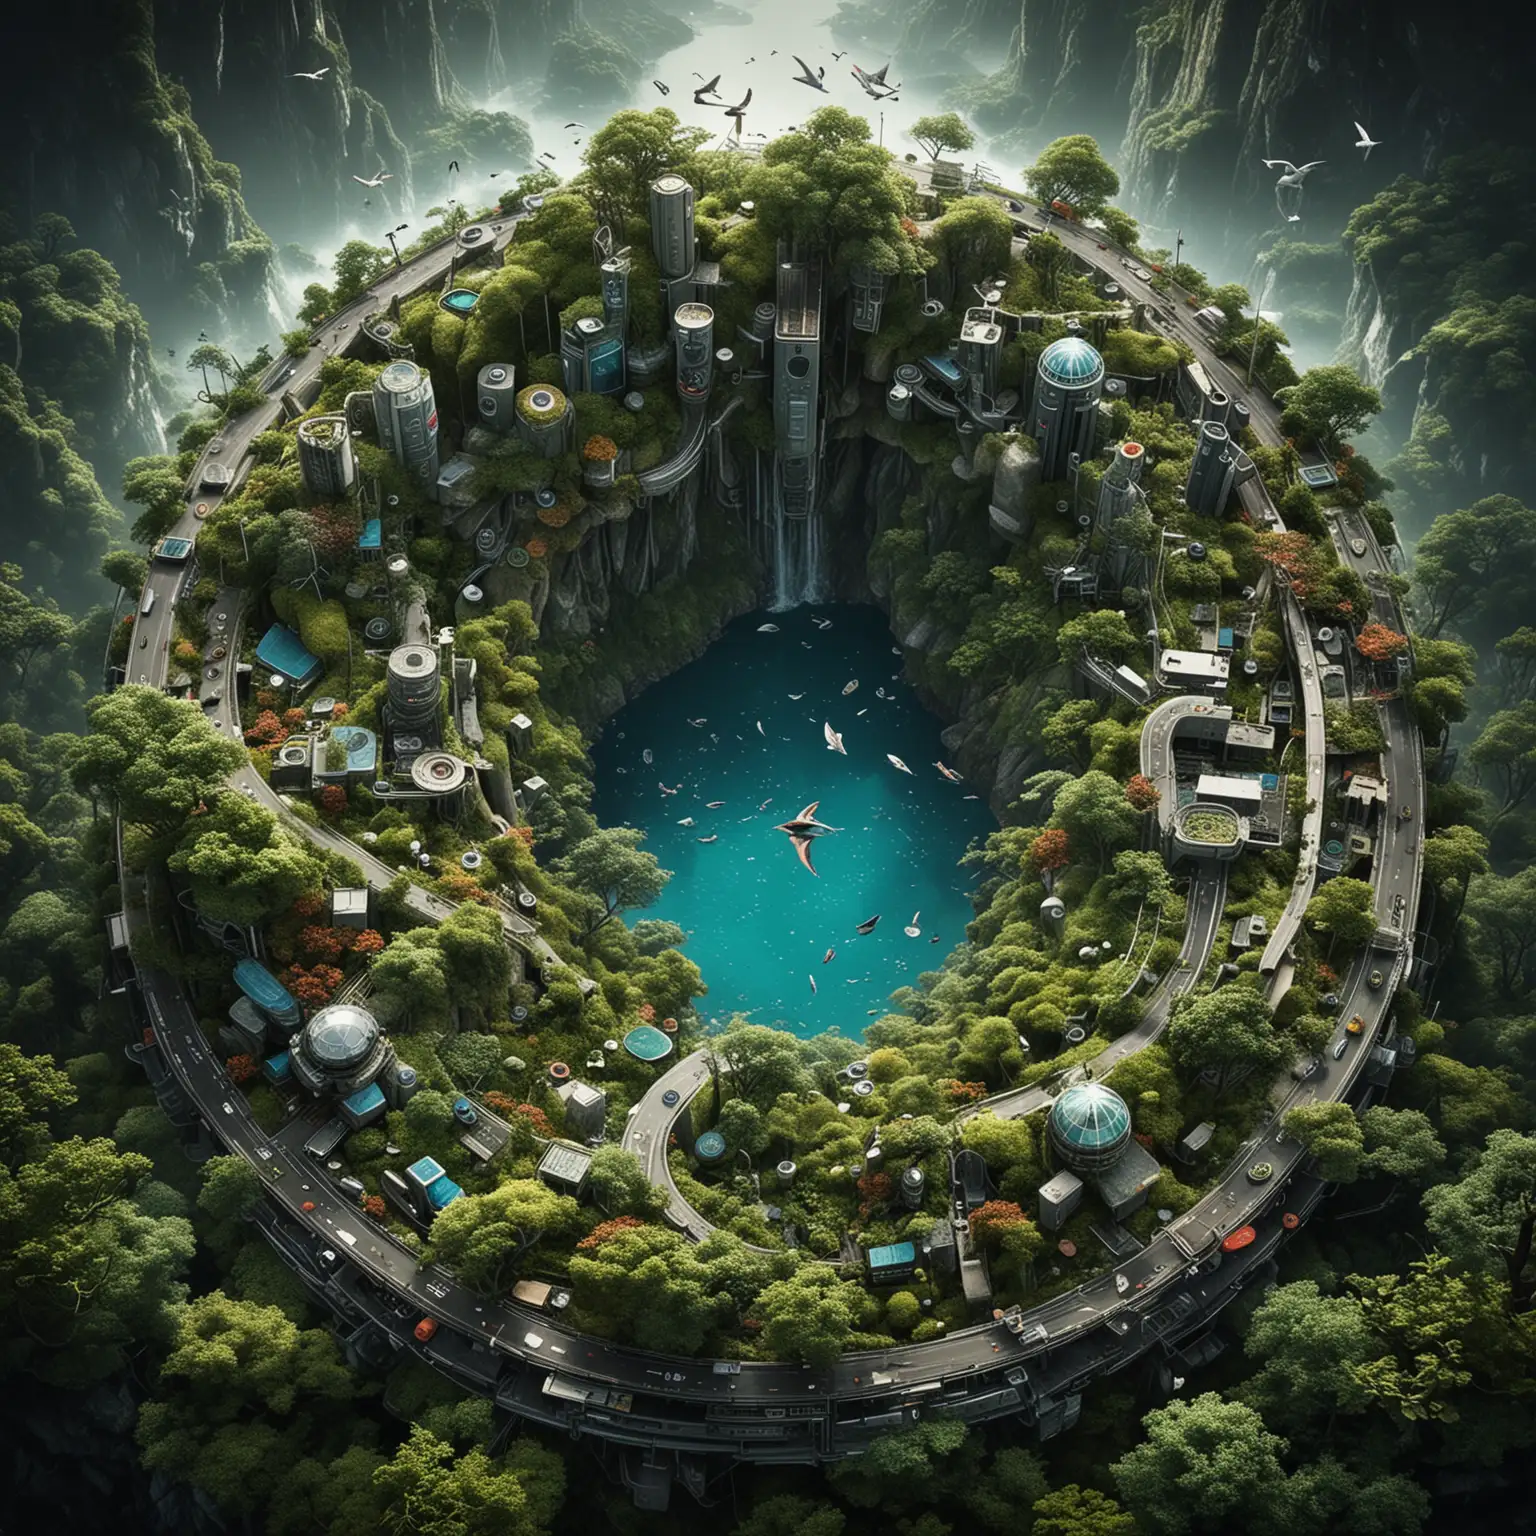 Fantasy World of Advanced Technology and Nature from Birds Eye View